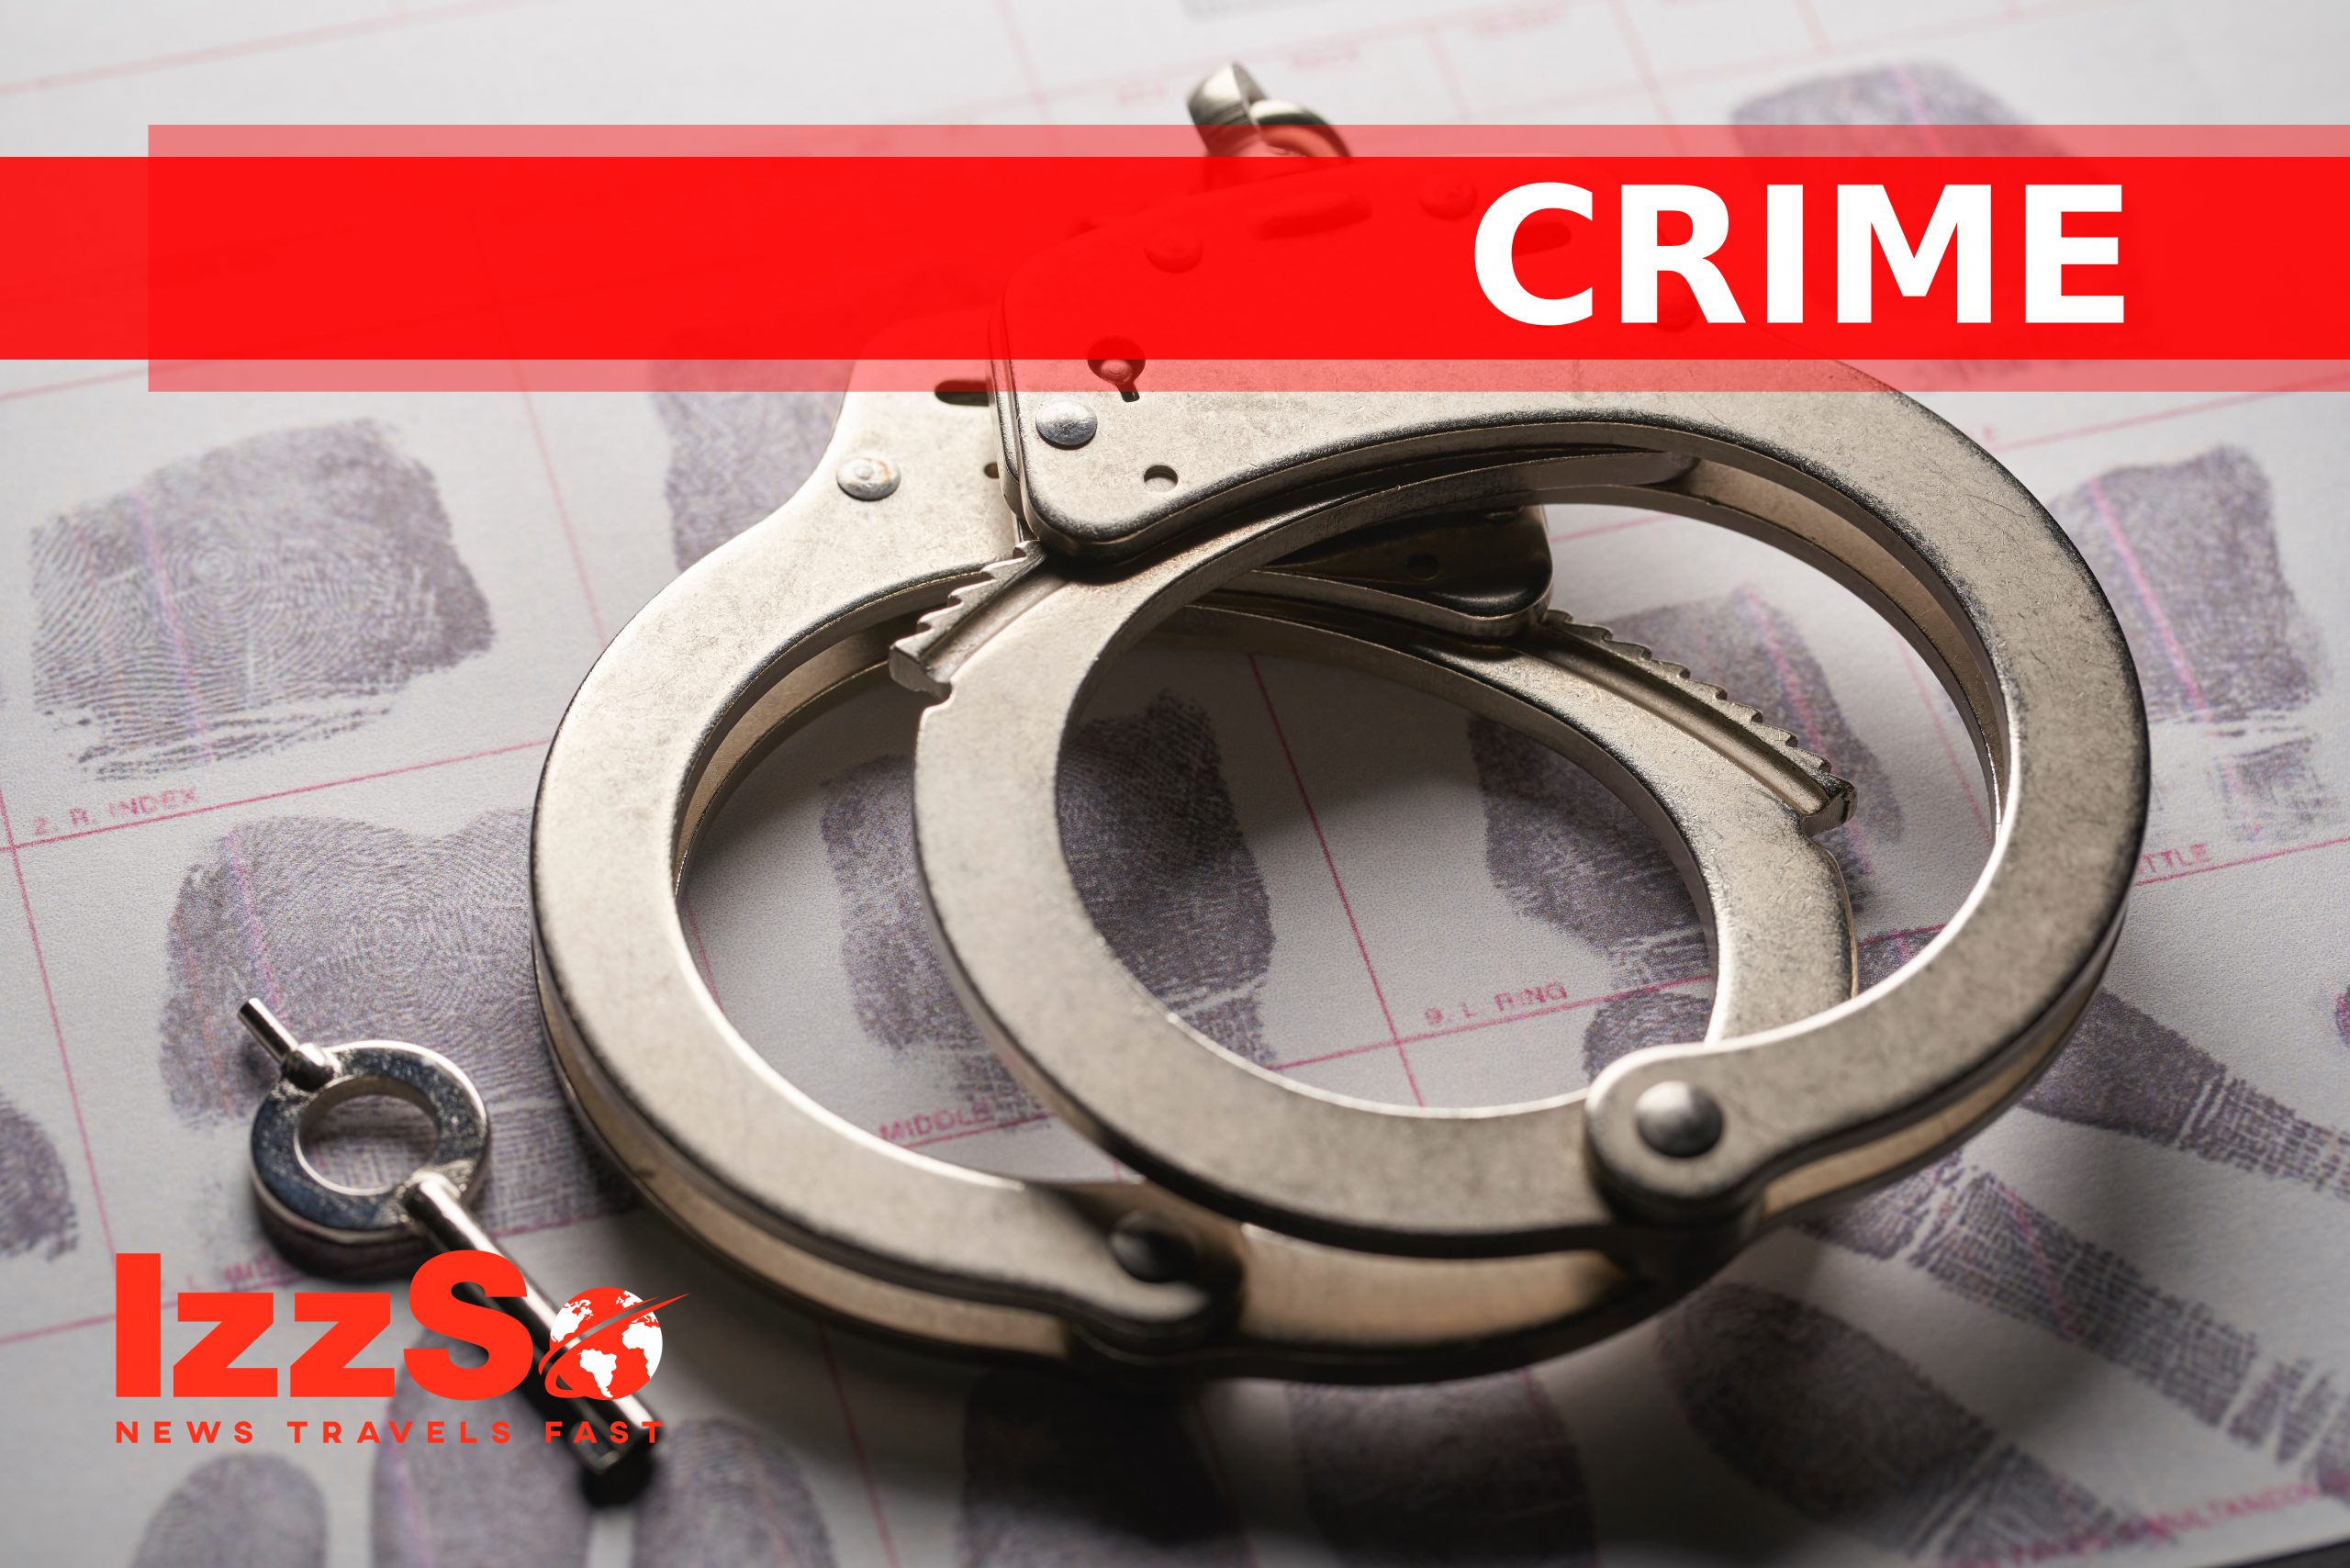 4 detained following Chaguanas robbery; stolen items recovered